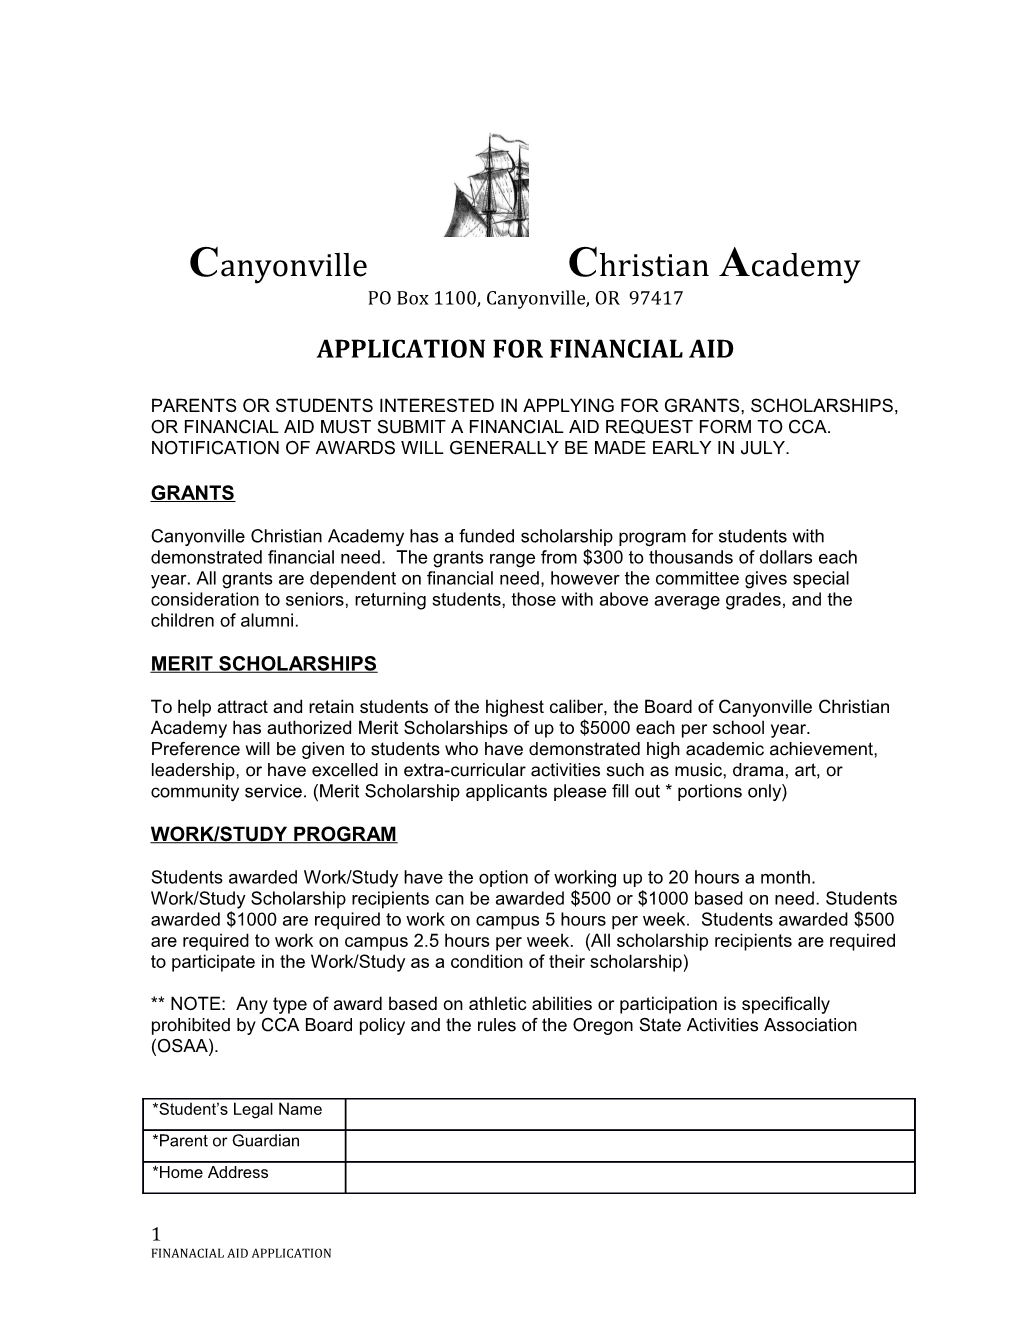 Application for Financial Aid